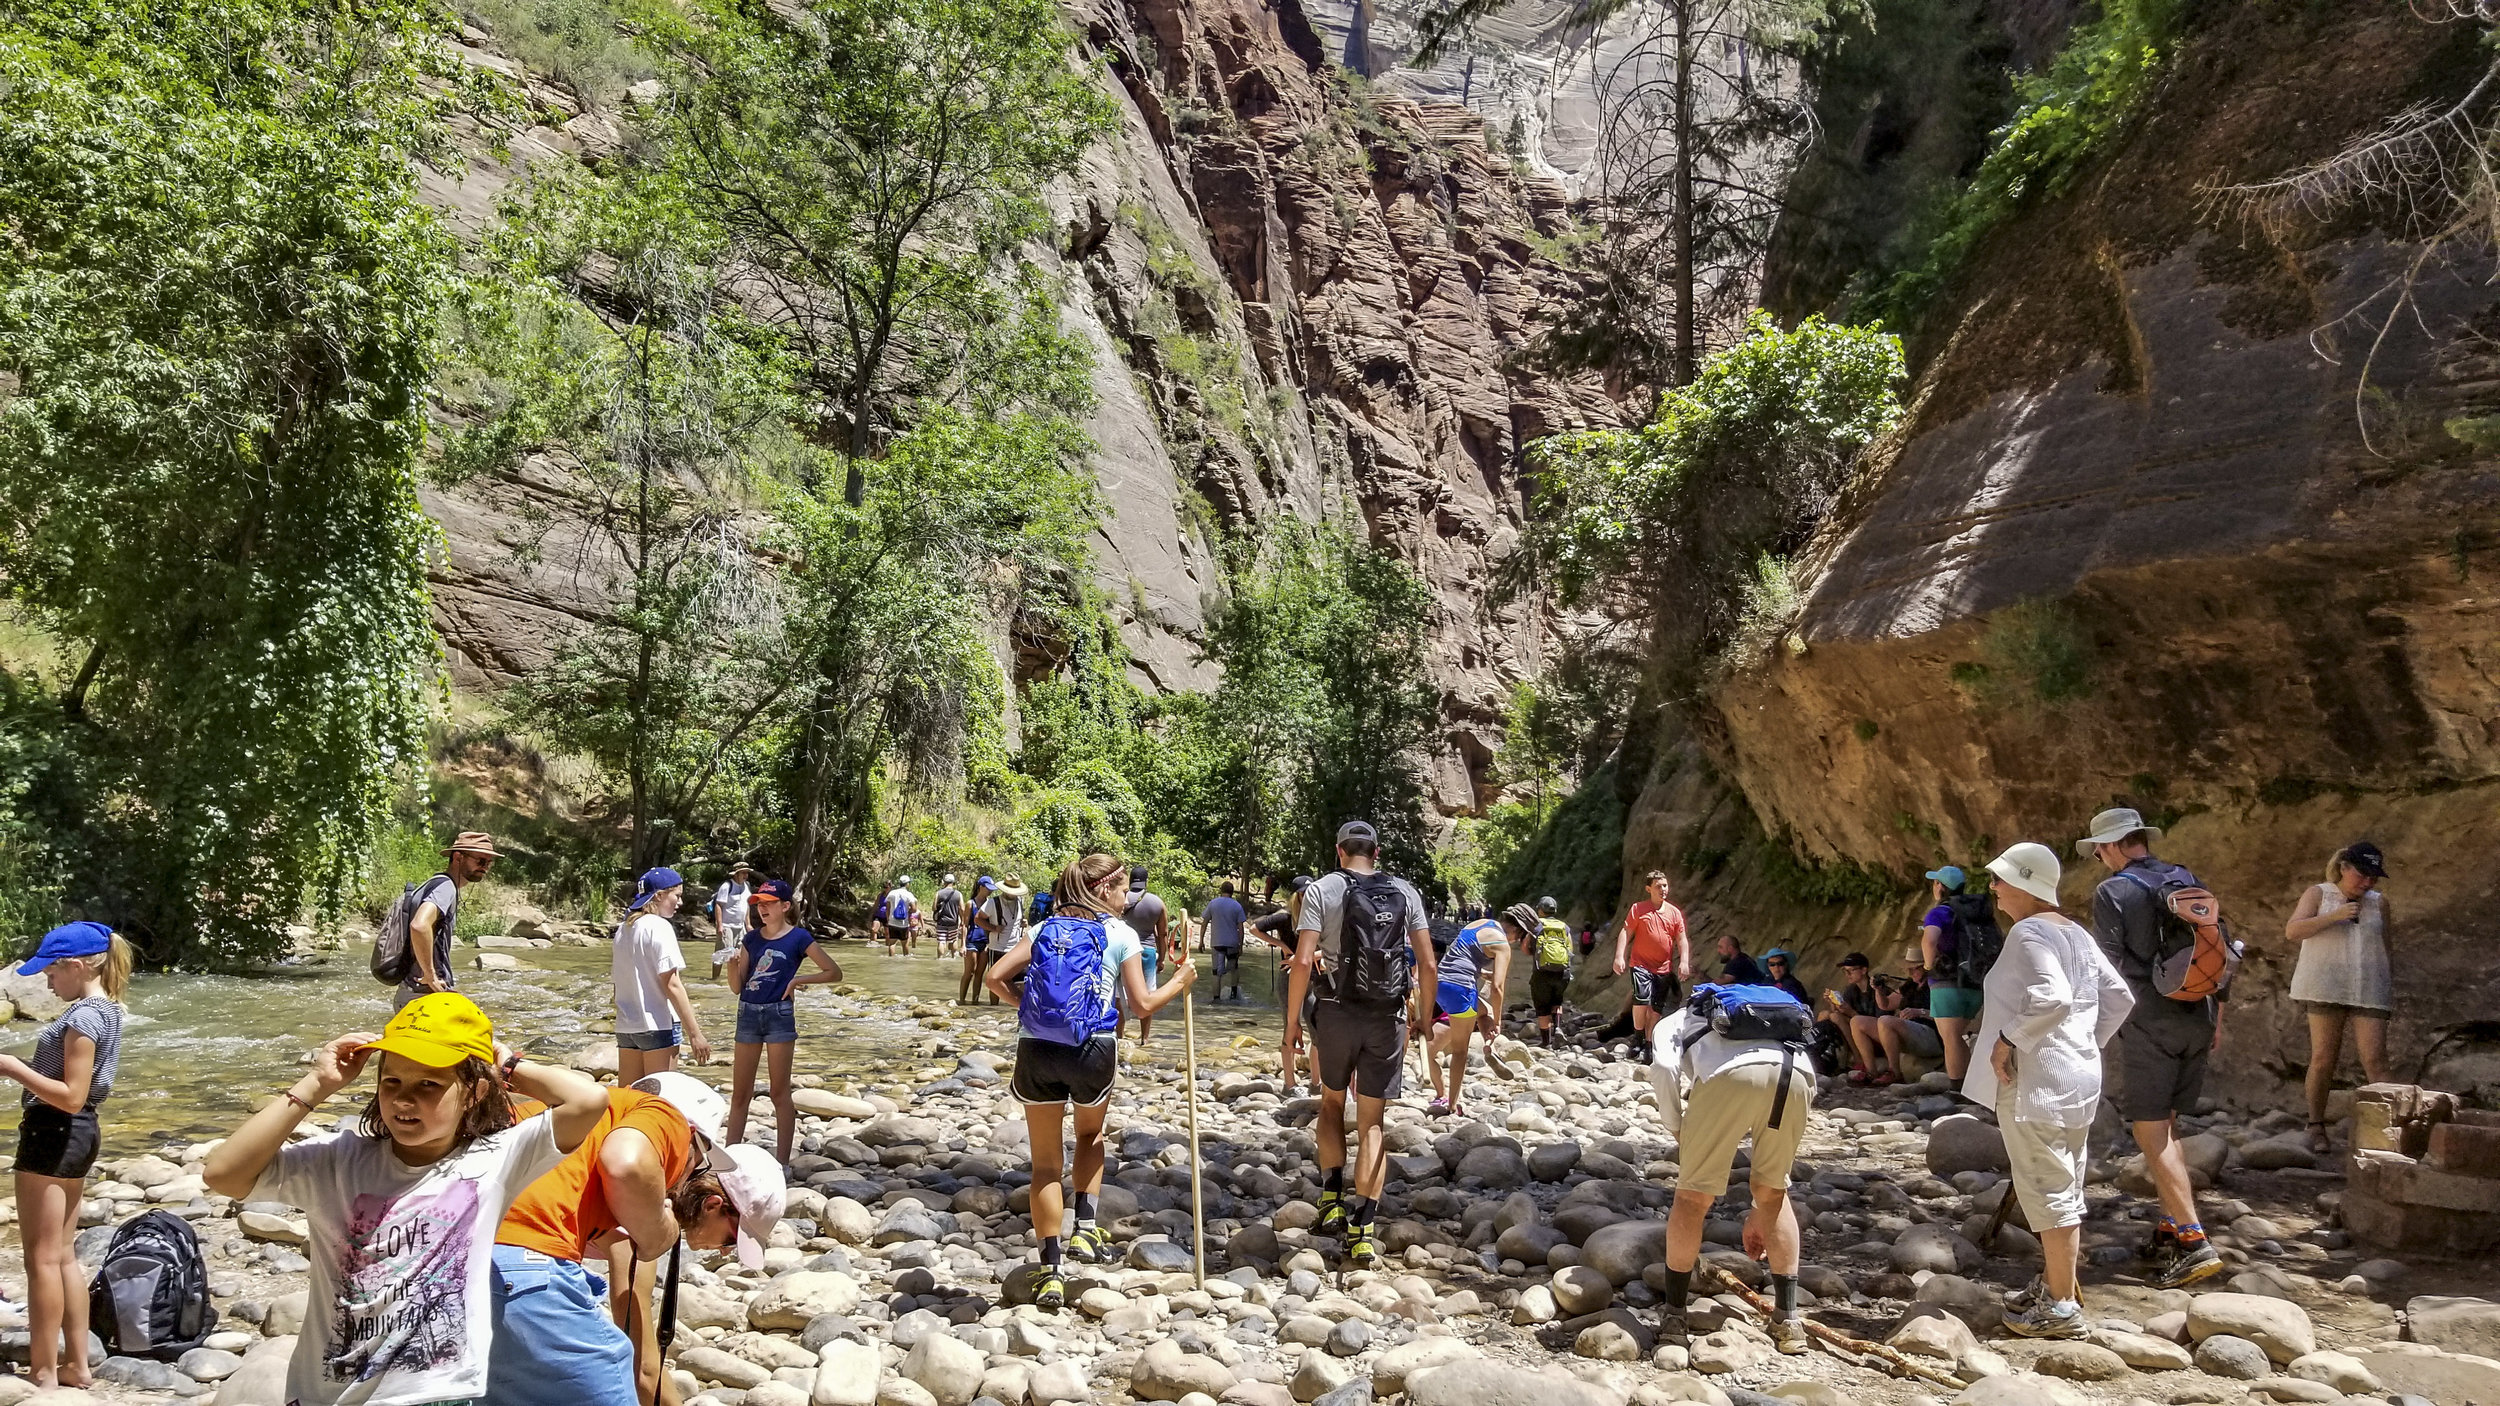  Zion National Park visitors congregate near the Virgin River to hike The Narrows at Zion National Park in Utah on Friday, July 14, 2017.  Patrick Connolly Las Vegas Review-Journal @PConnPie 